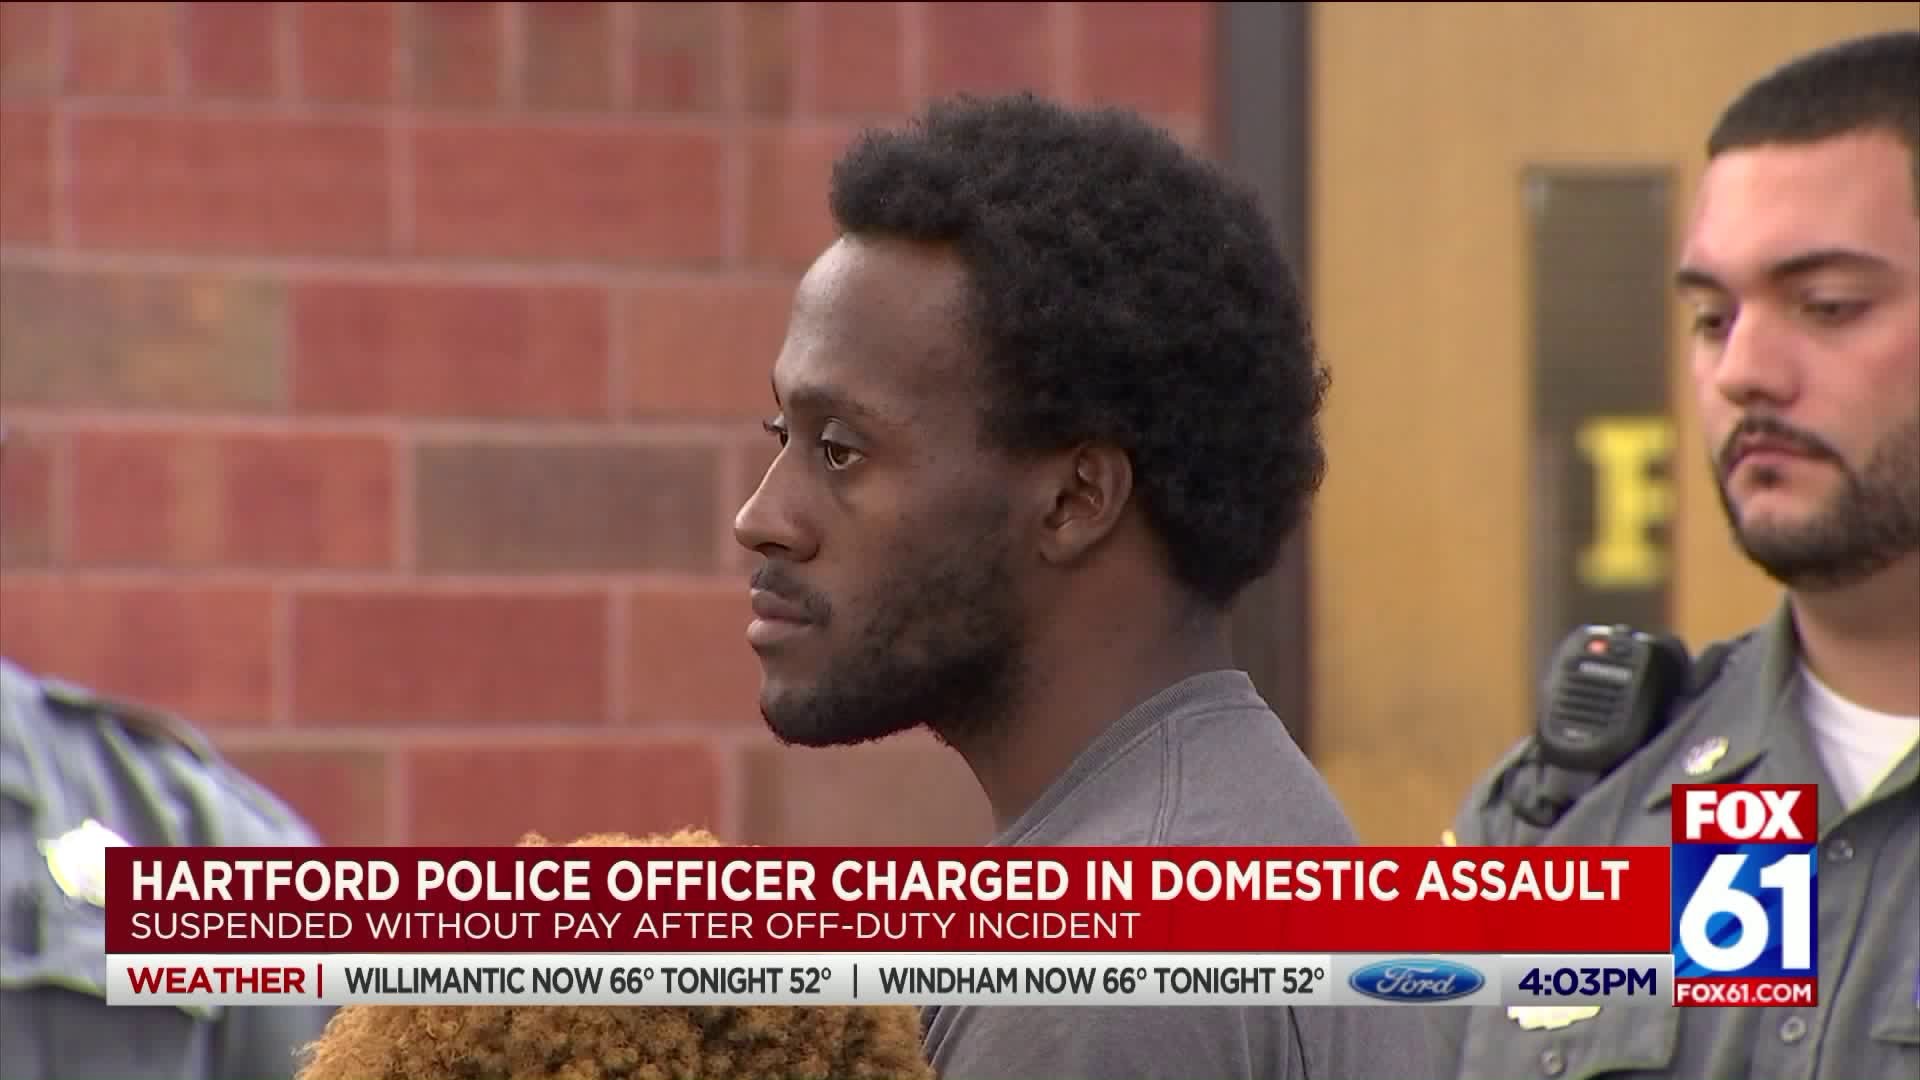 HPD Officer charged in domestic assault